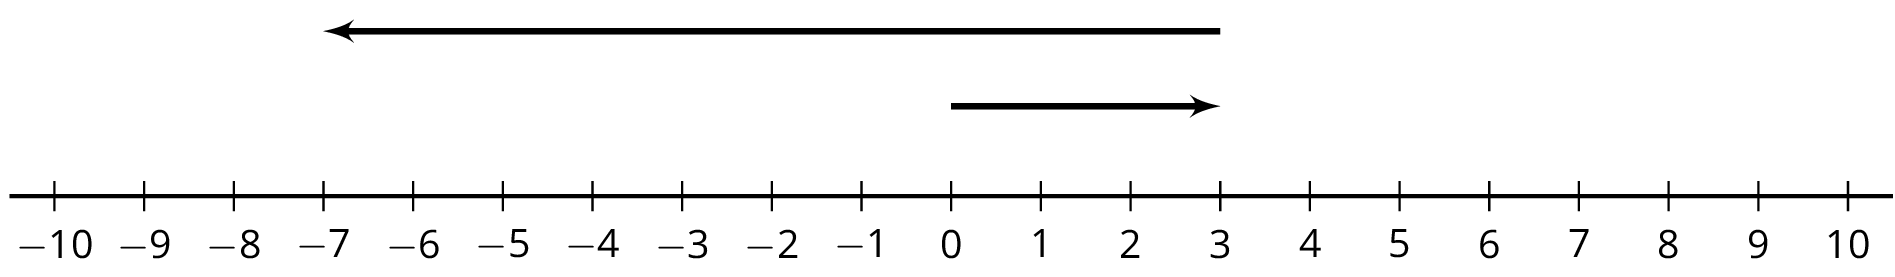 A number line with the numbers negative 10 through 10 indicated. An arrow starts at 3, points to the left, and ends at negative 7. A second arrow starts at 0, points to the right, and ends at 3. 